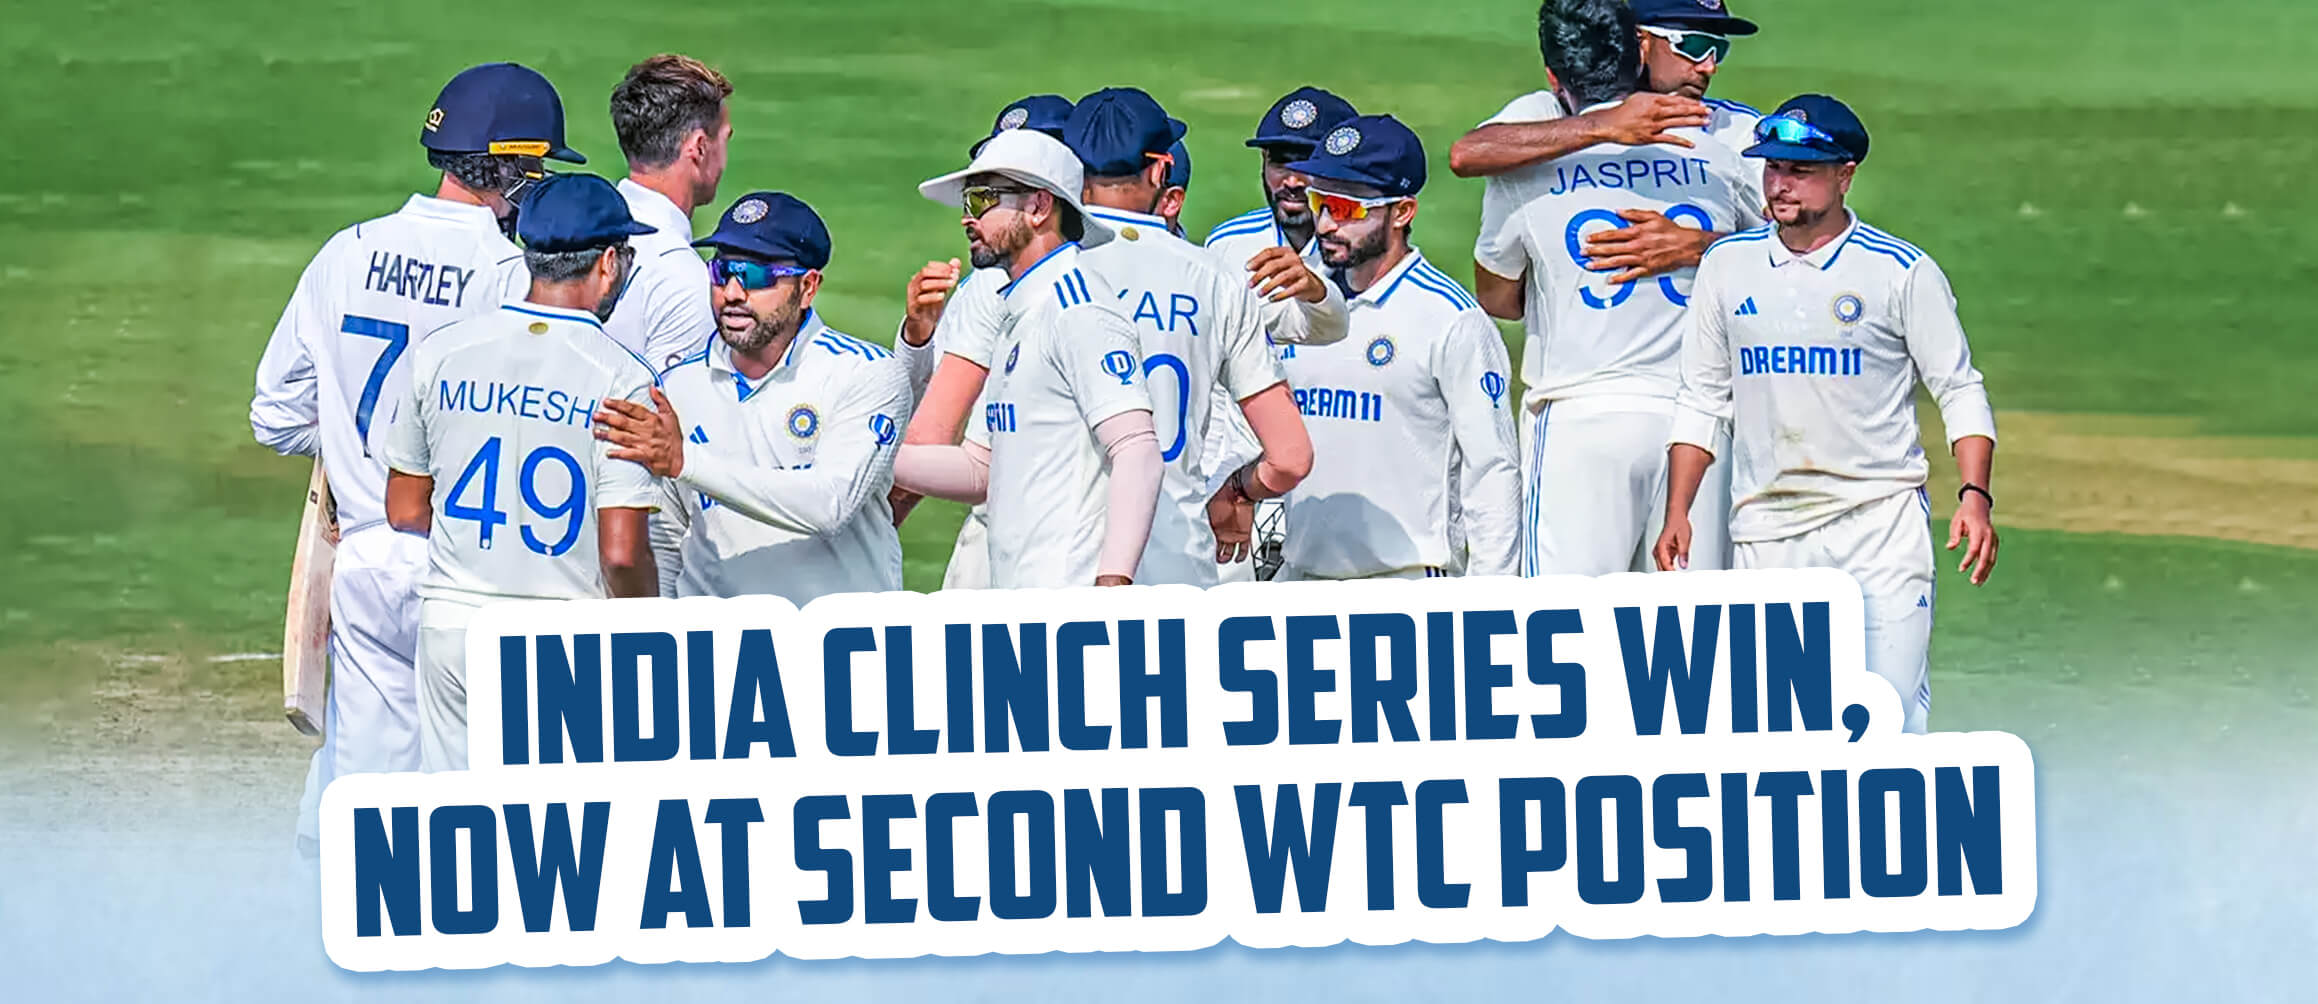 India Clinch Series Win, Now at second WTC Position